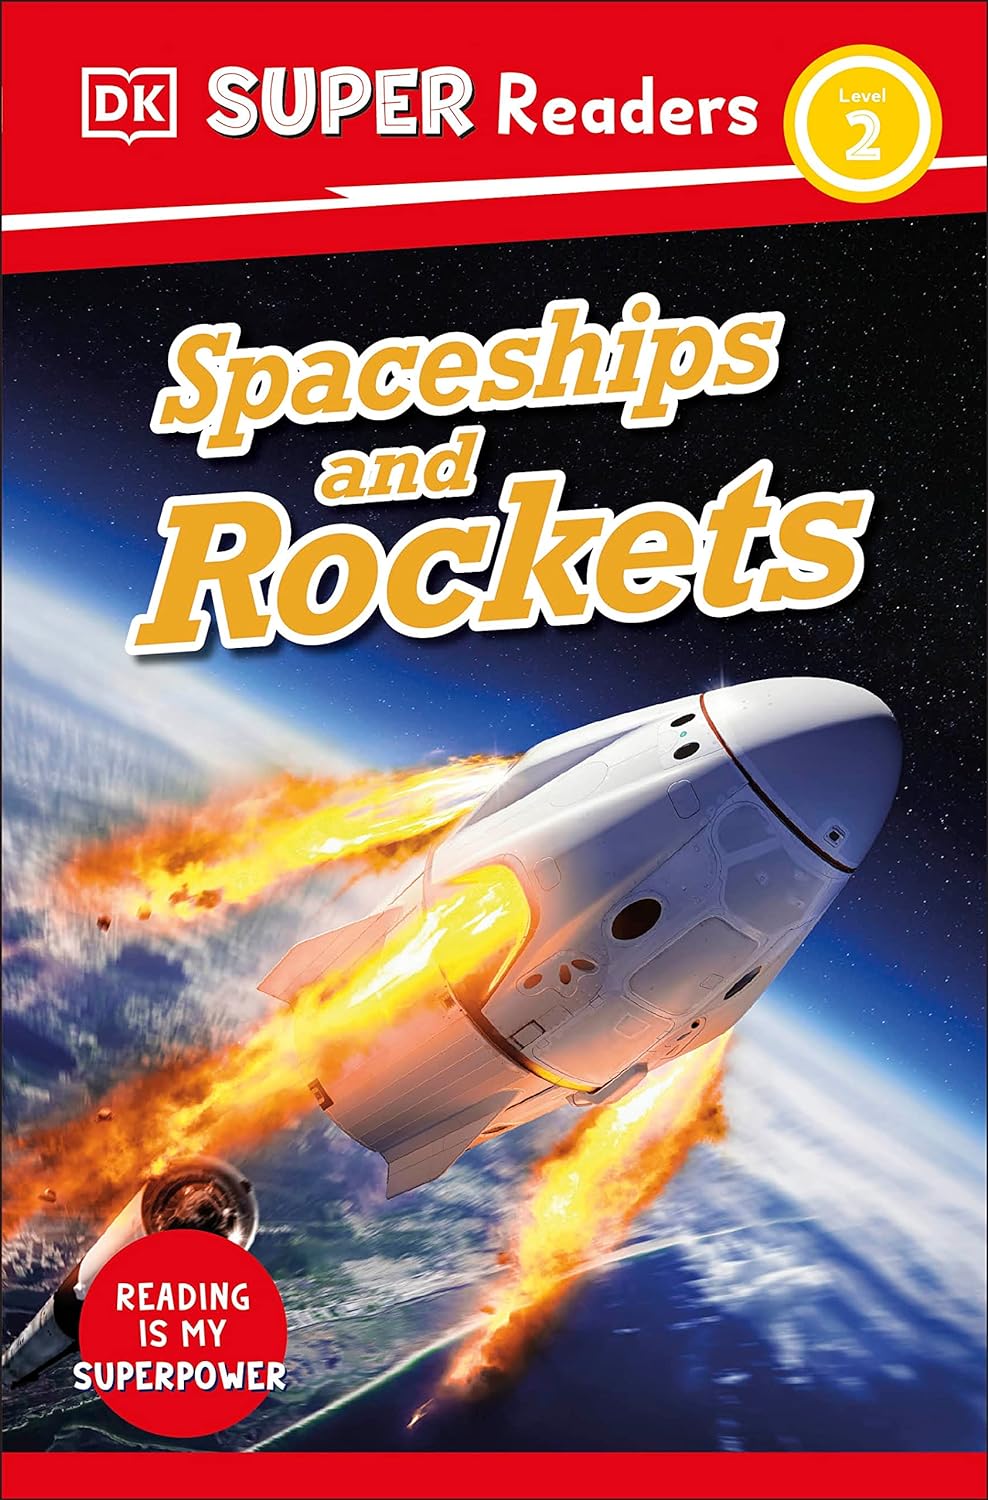 DK Super Readers Level 2 : Spaceships and Rockets